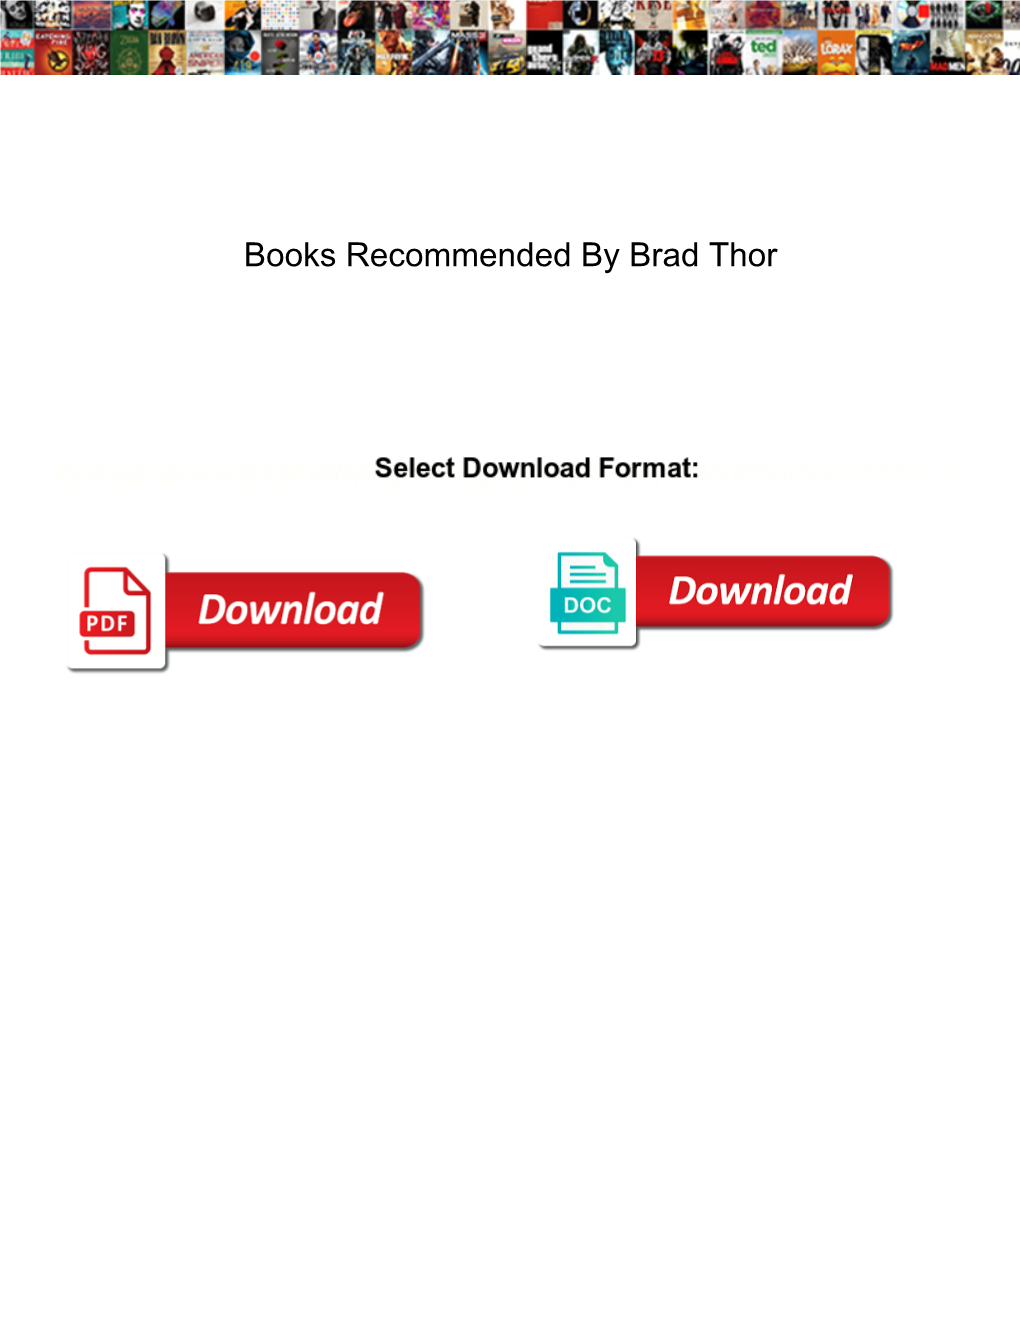 Books Recommended by Brad Thor Capsule